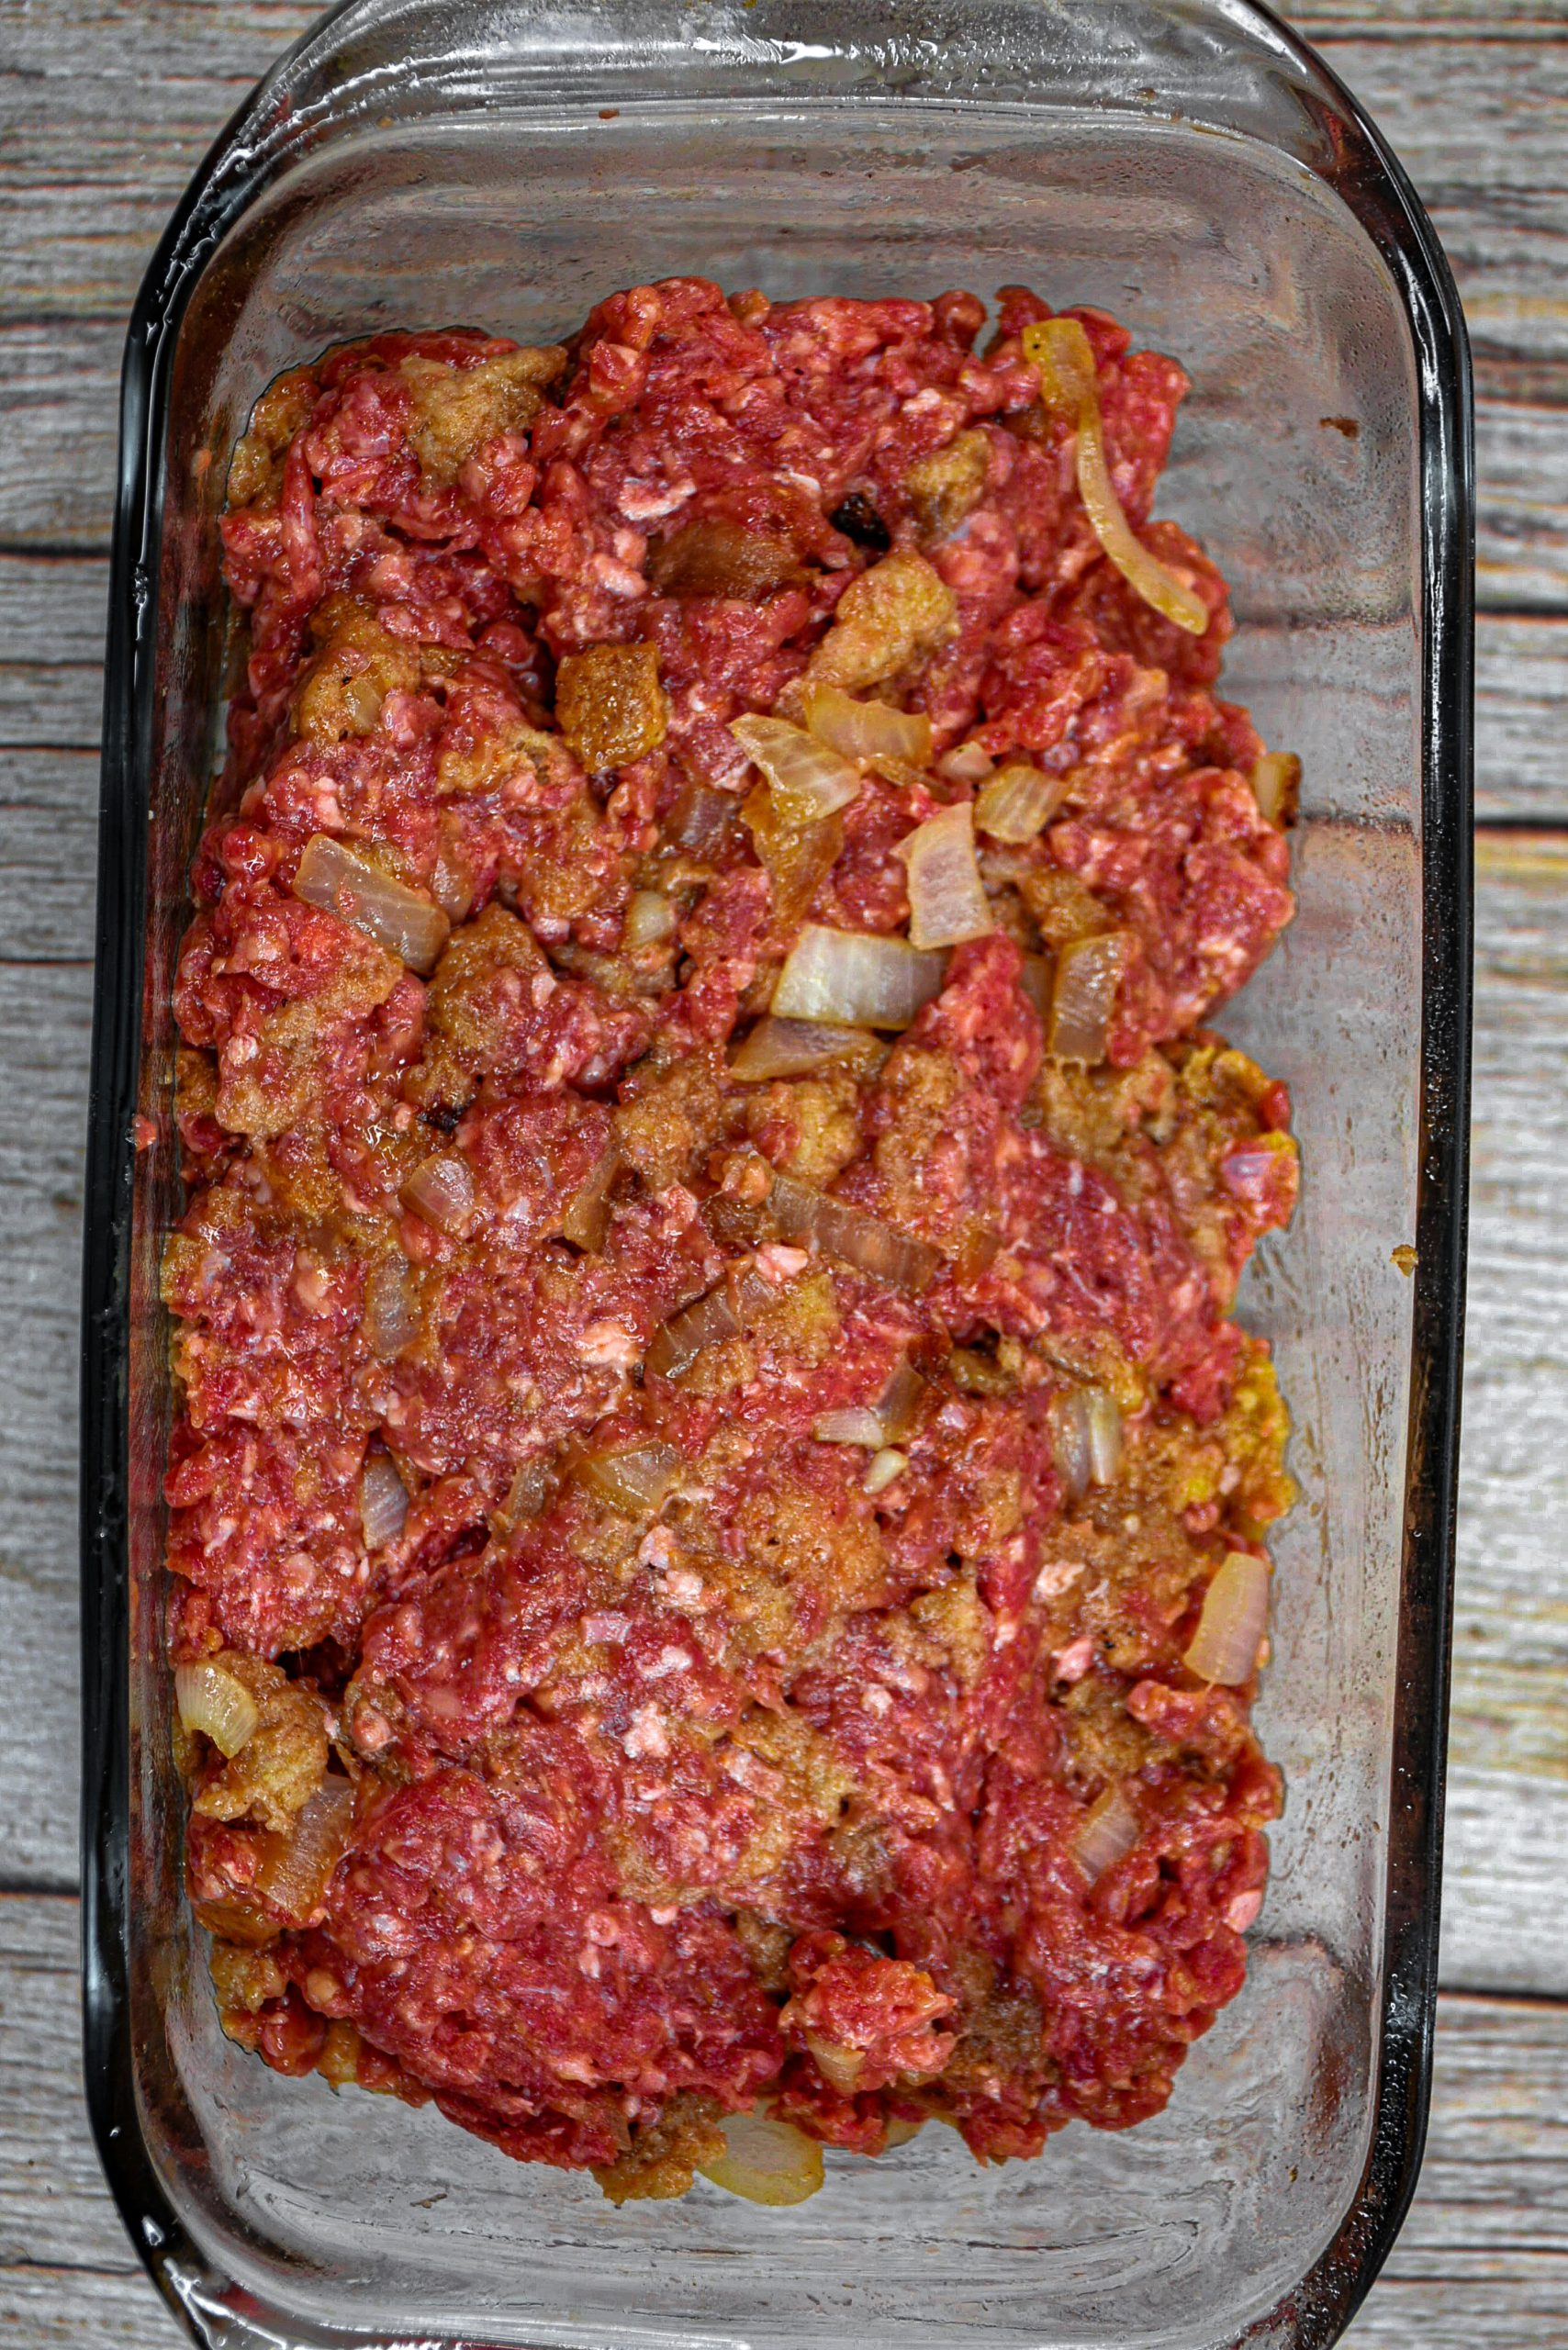 Form the loaf. Transfer the meat loaf into the prepared loaf pan. Place in the oven.